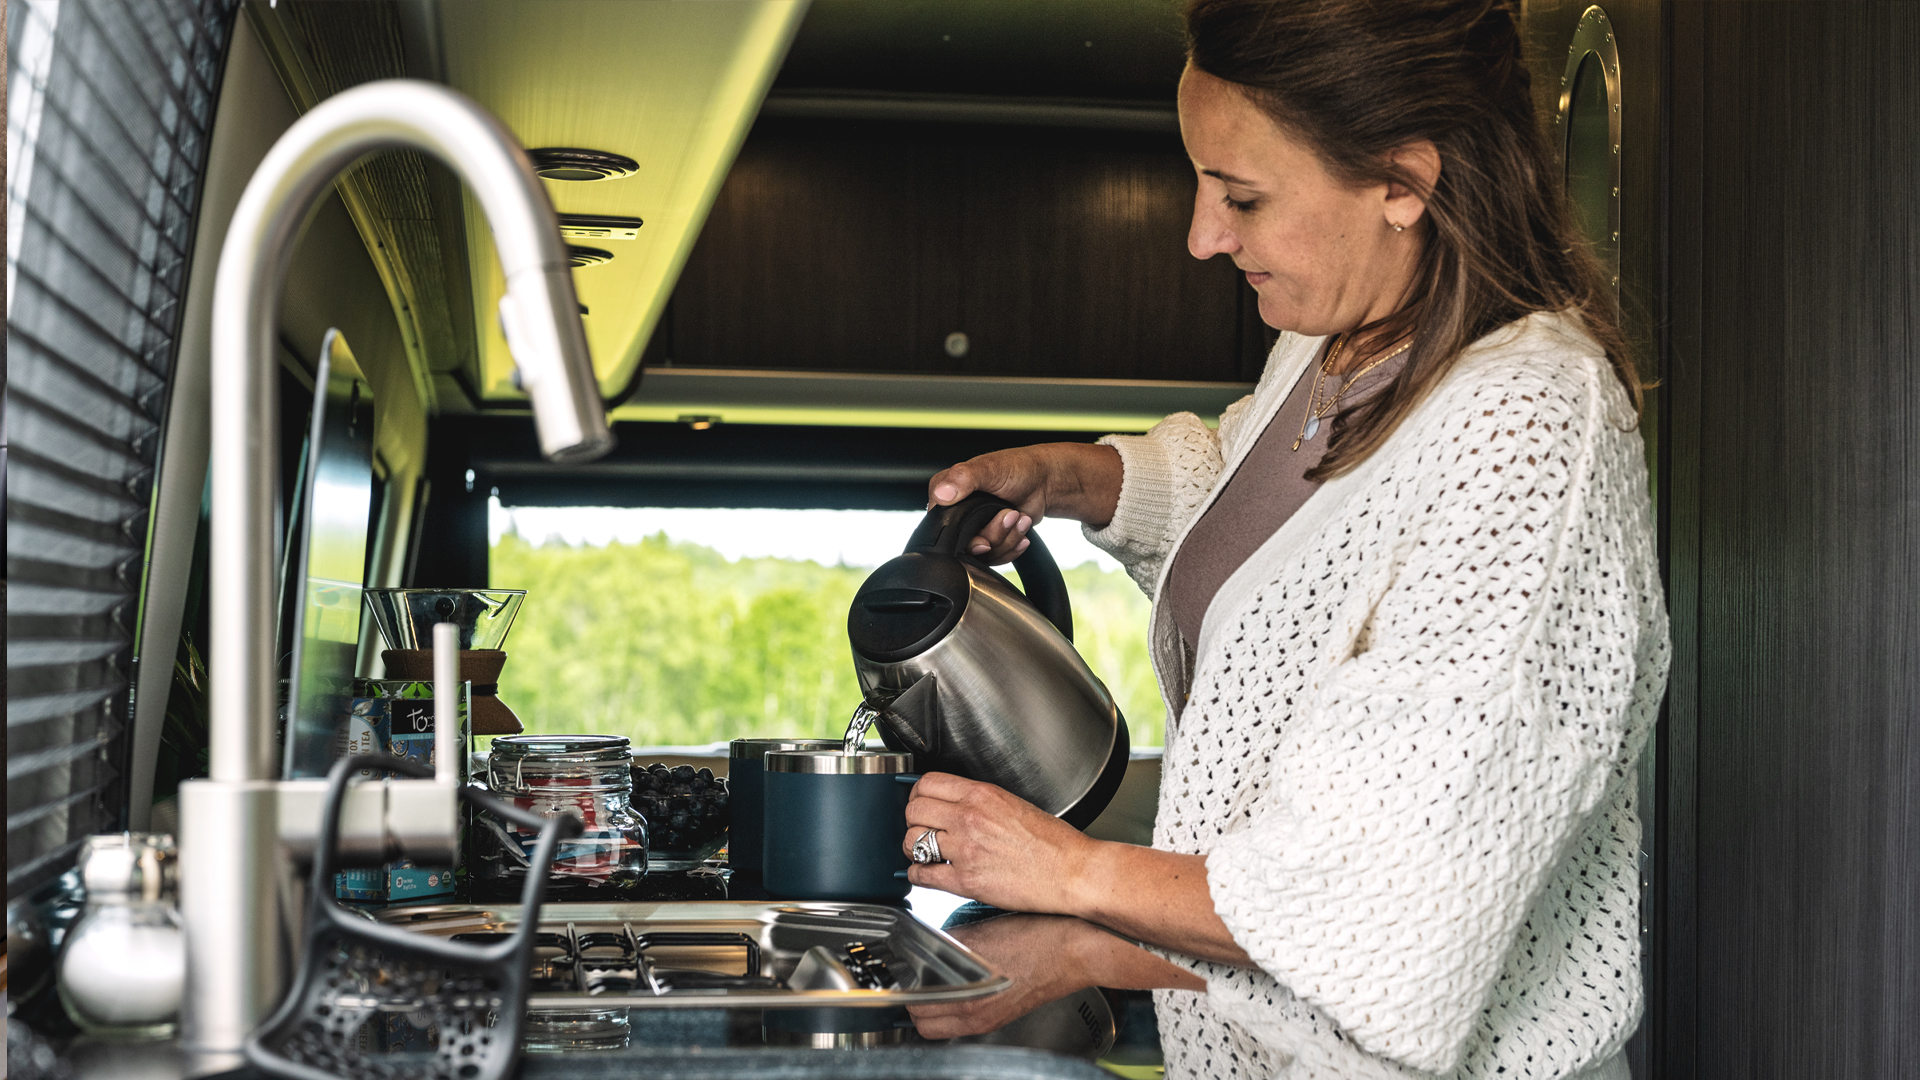 A woman pouring coffee in the kitchen of her Airstream Interstate 24 Touring Coach